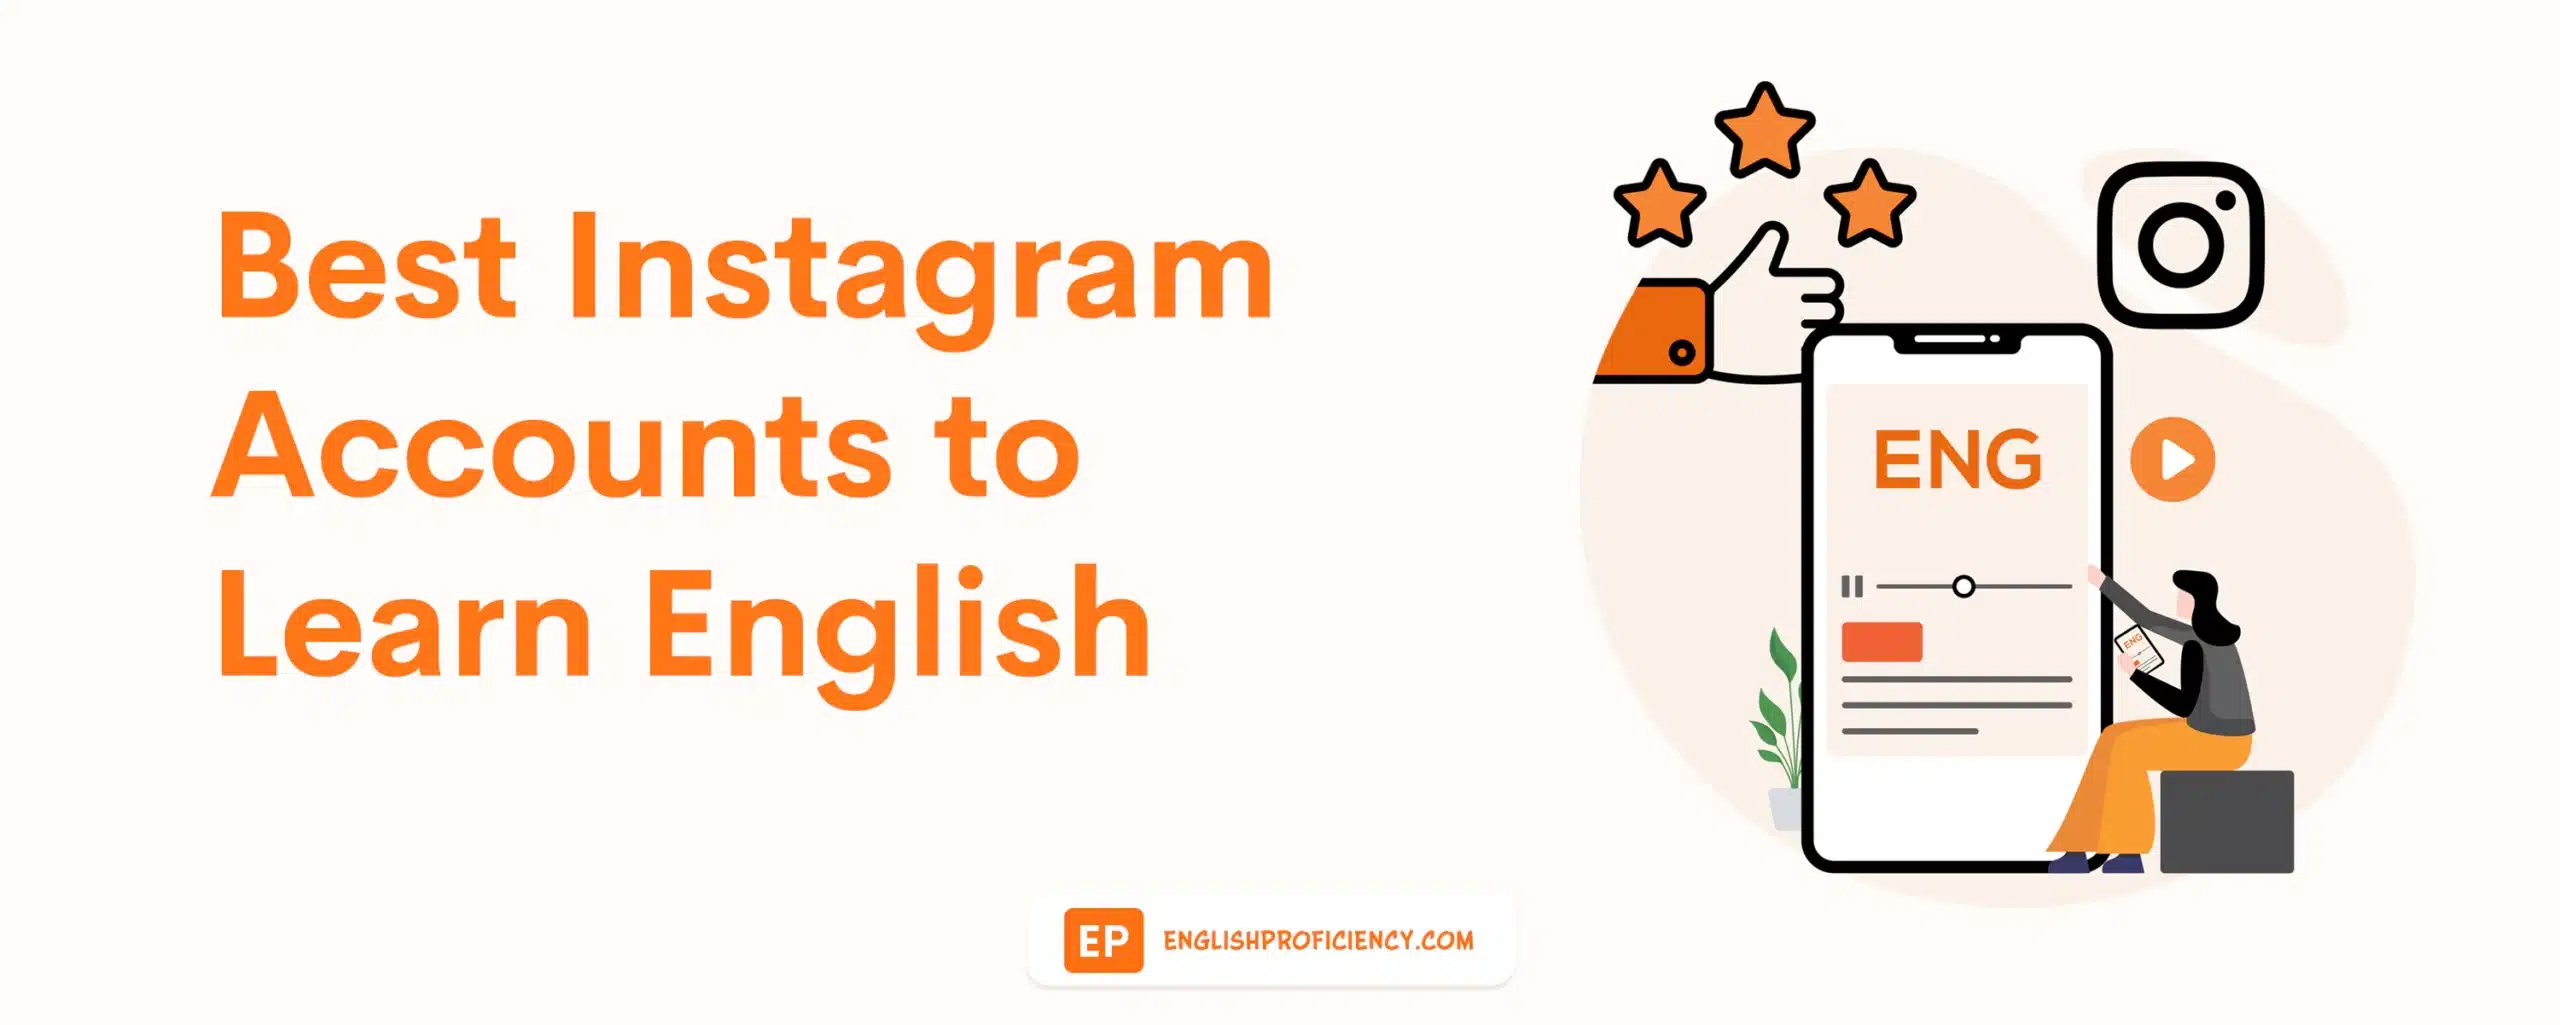 Best Instagram Accounts to Learn English